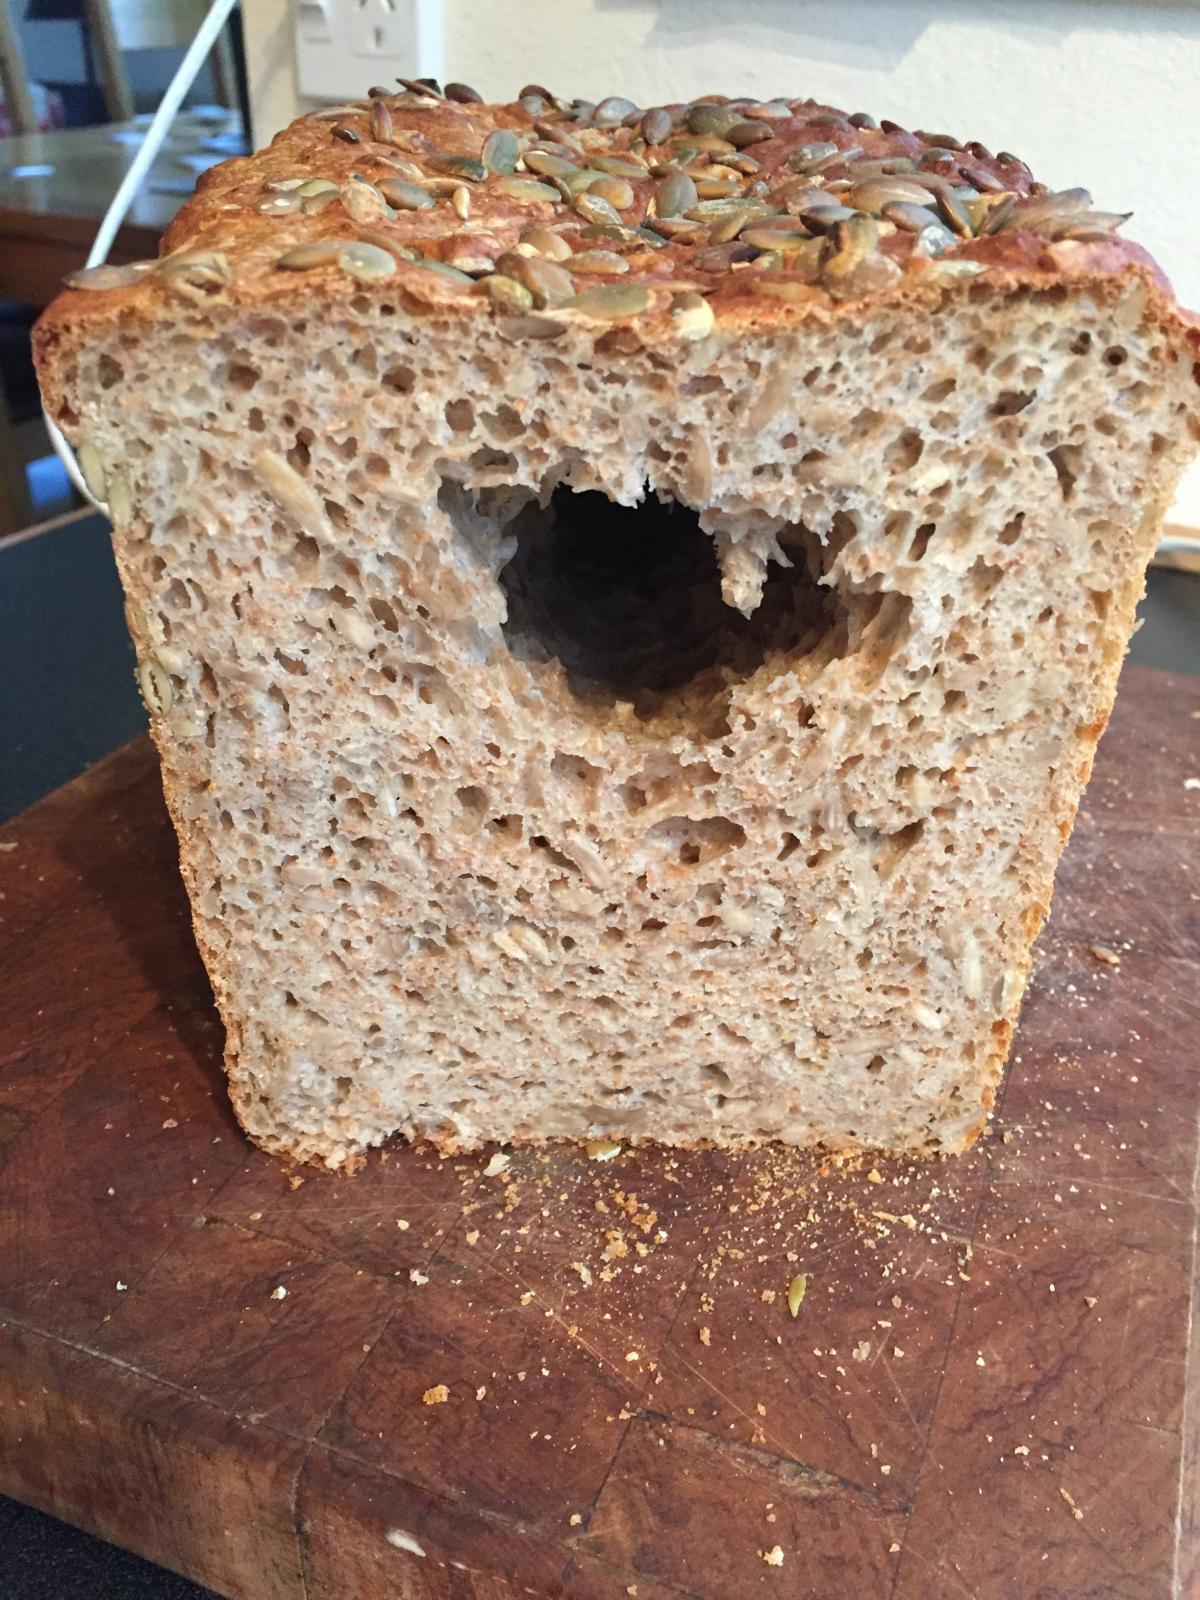 There is a hole through the middle of my bread! Help please.